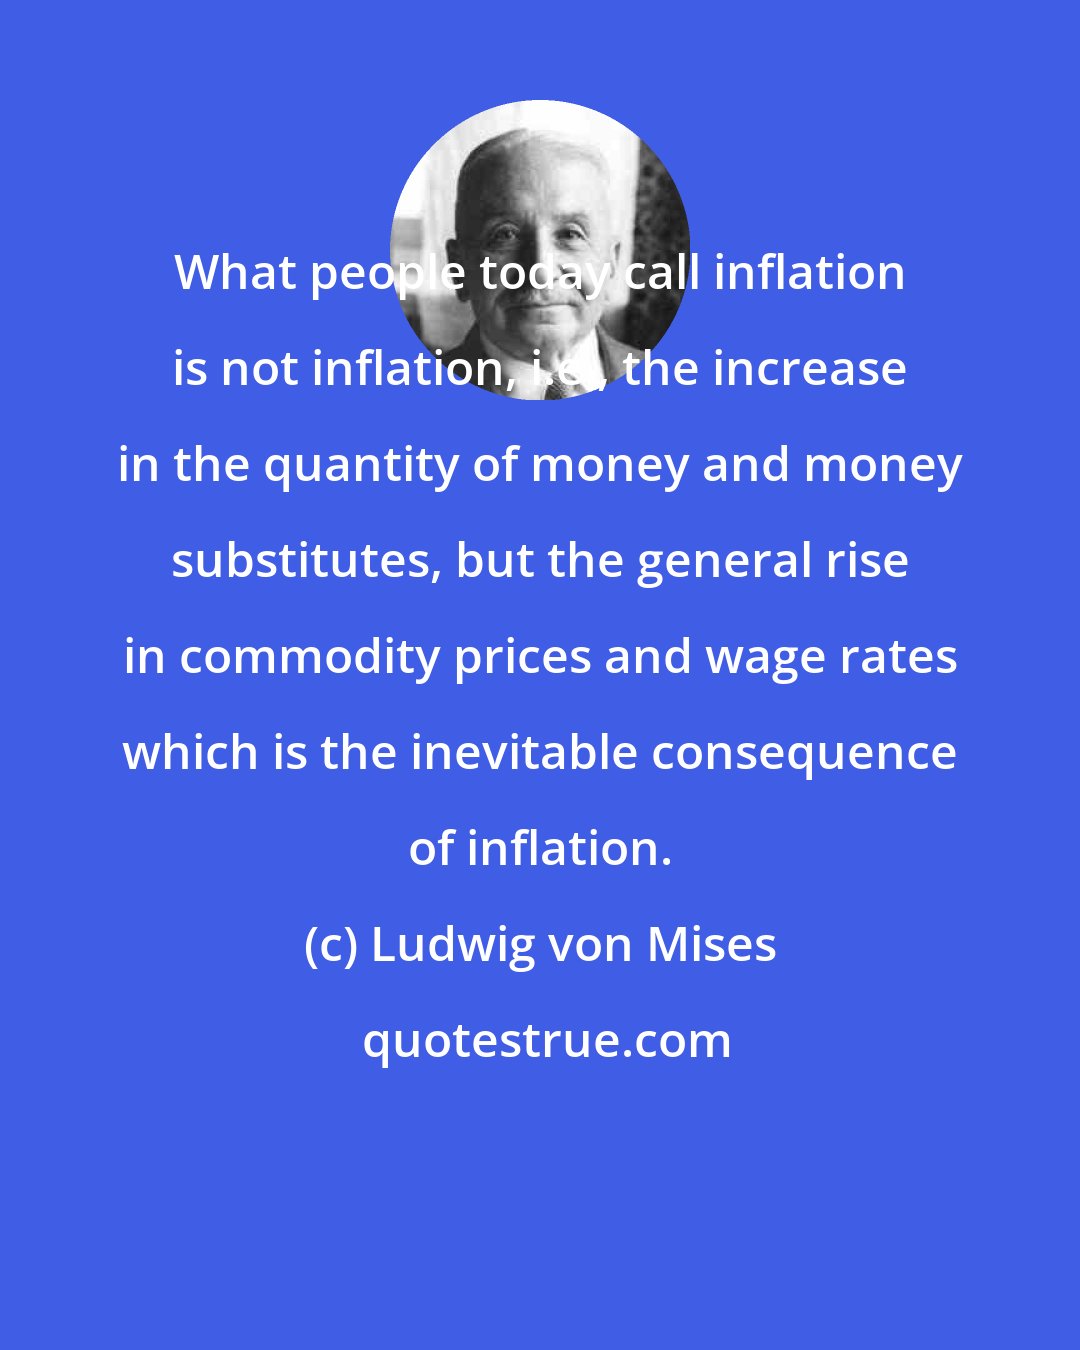 Ludwig von Mises: What people today call inflation is not inflation, i.e., the increase in the quantity of money and money substitutes, but the general rise in commodity prices and wage rates which is the inevitable consequence of inflation.